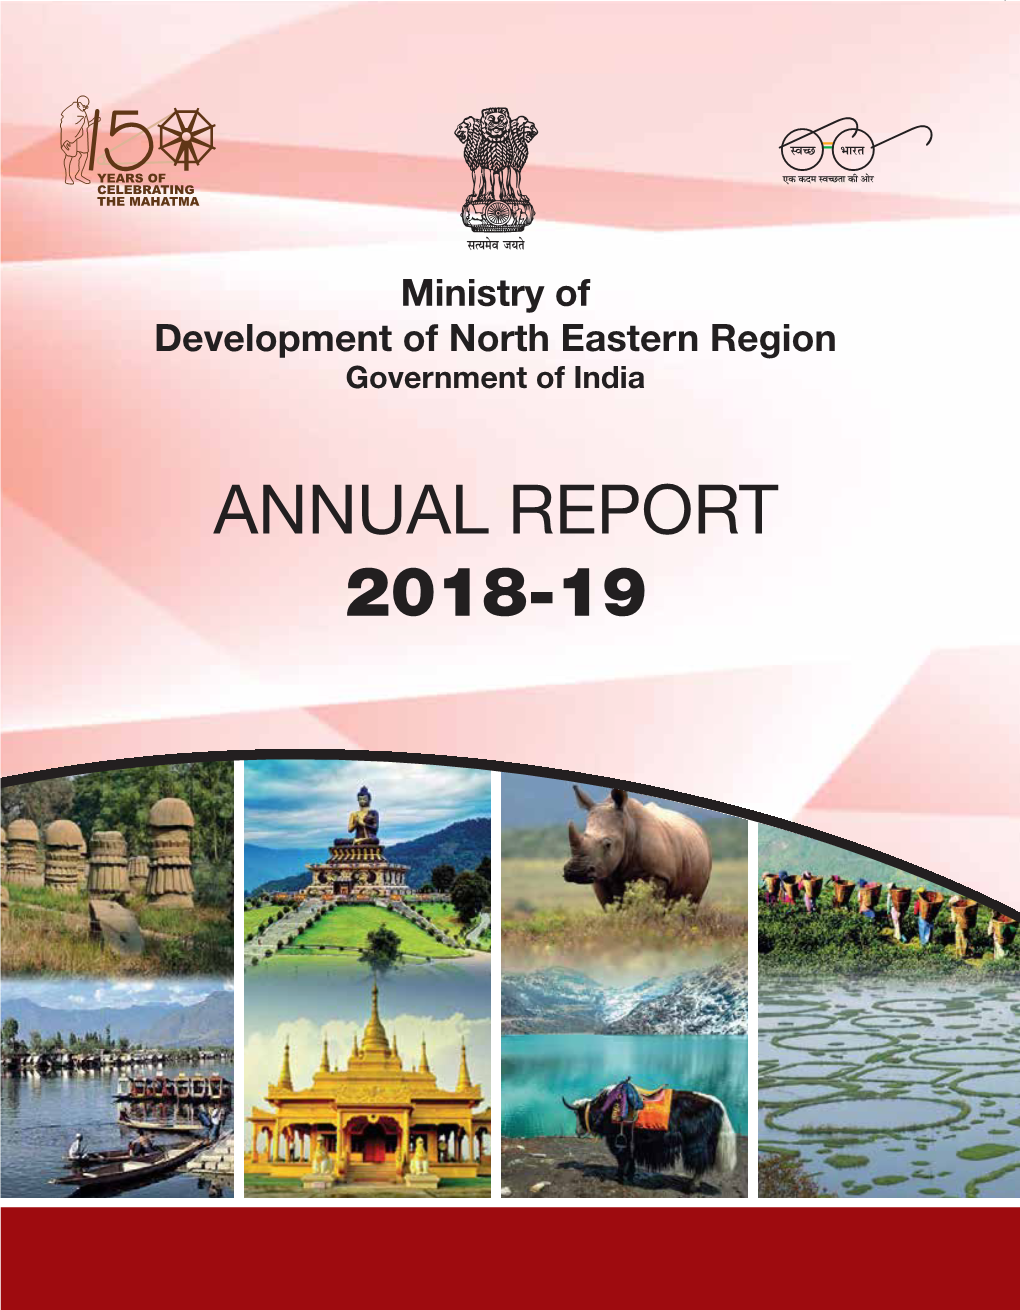 Annual Report 2018-19 Ministry of Development of North Eastern Region Government of India